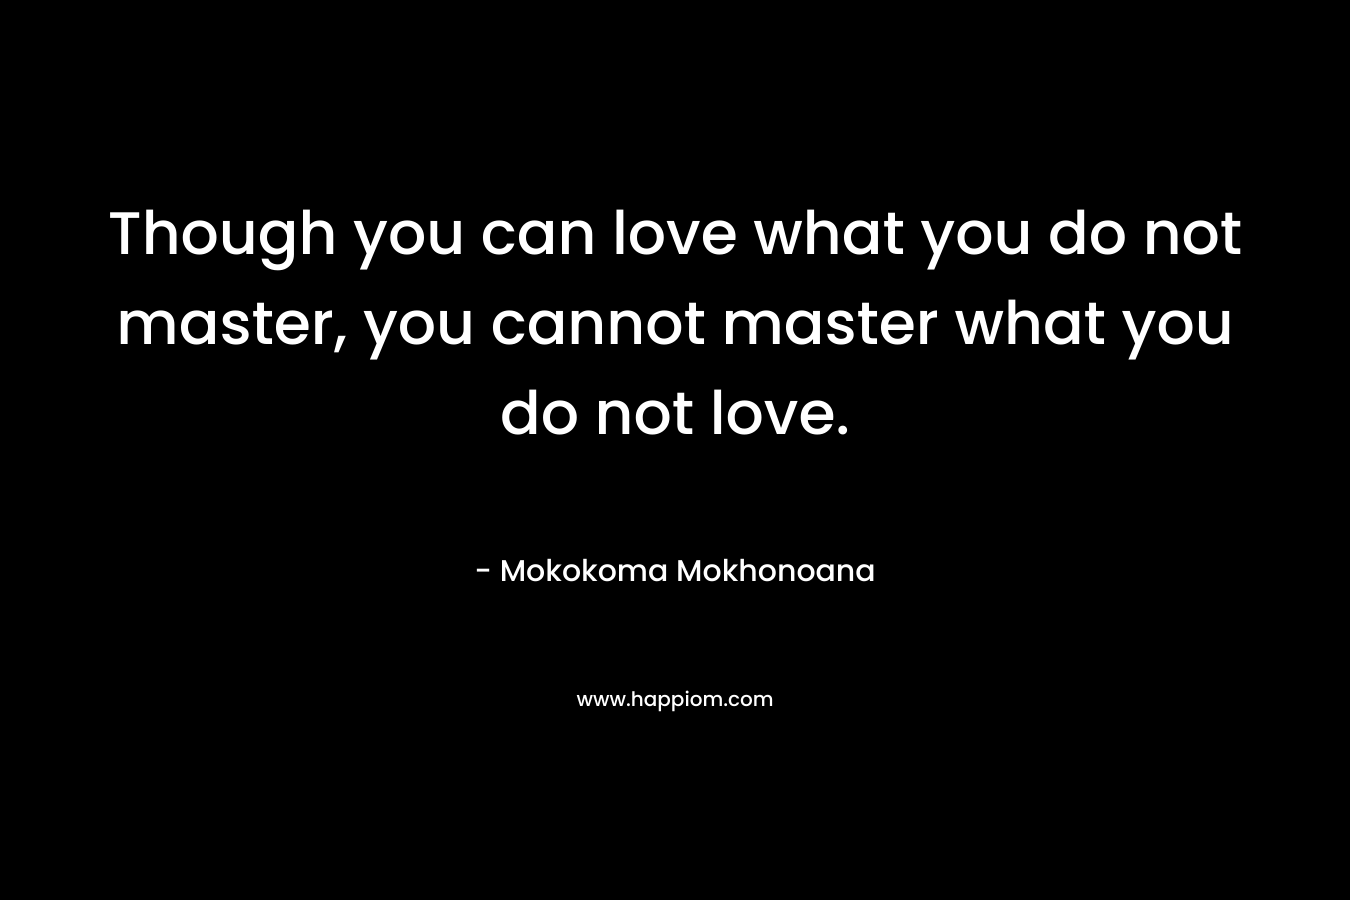 Though you can love what you do not master, you cannot master what you do not love.